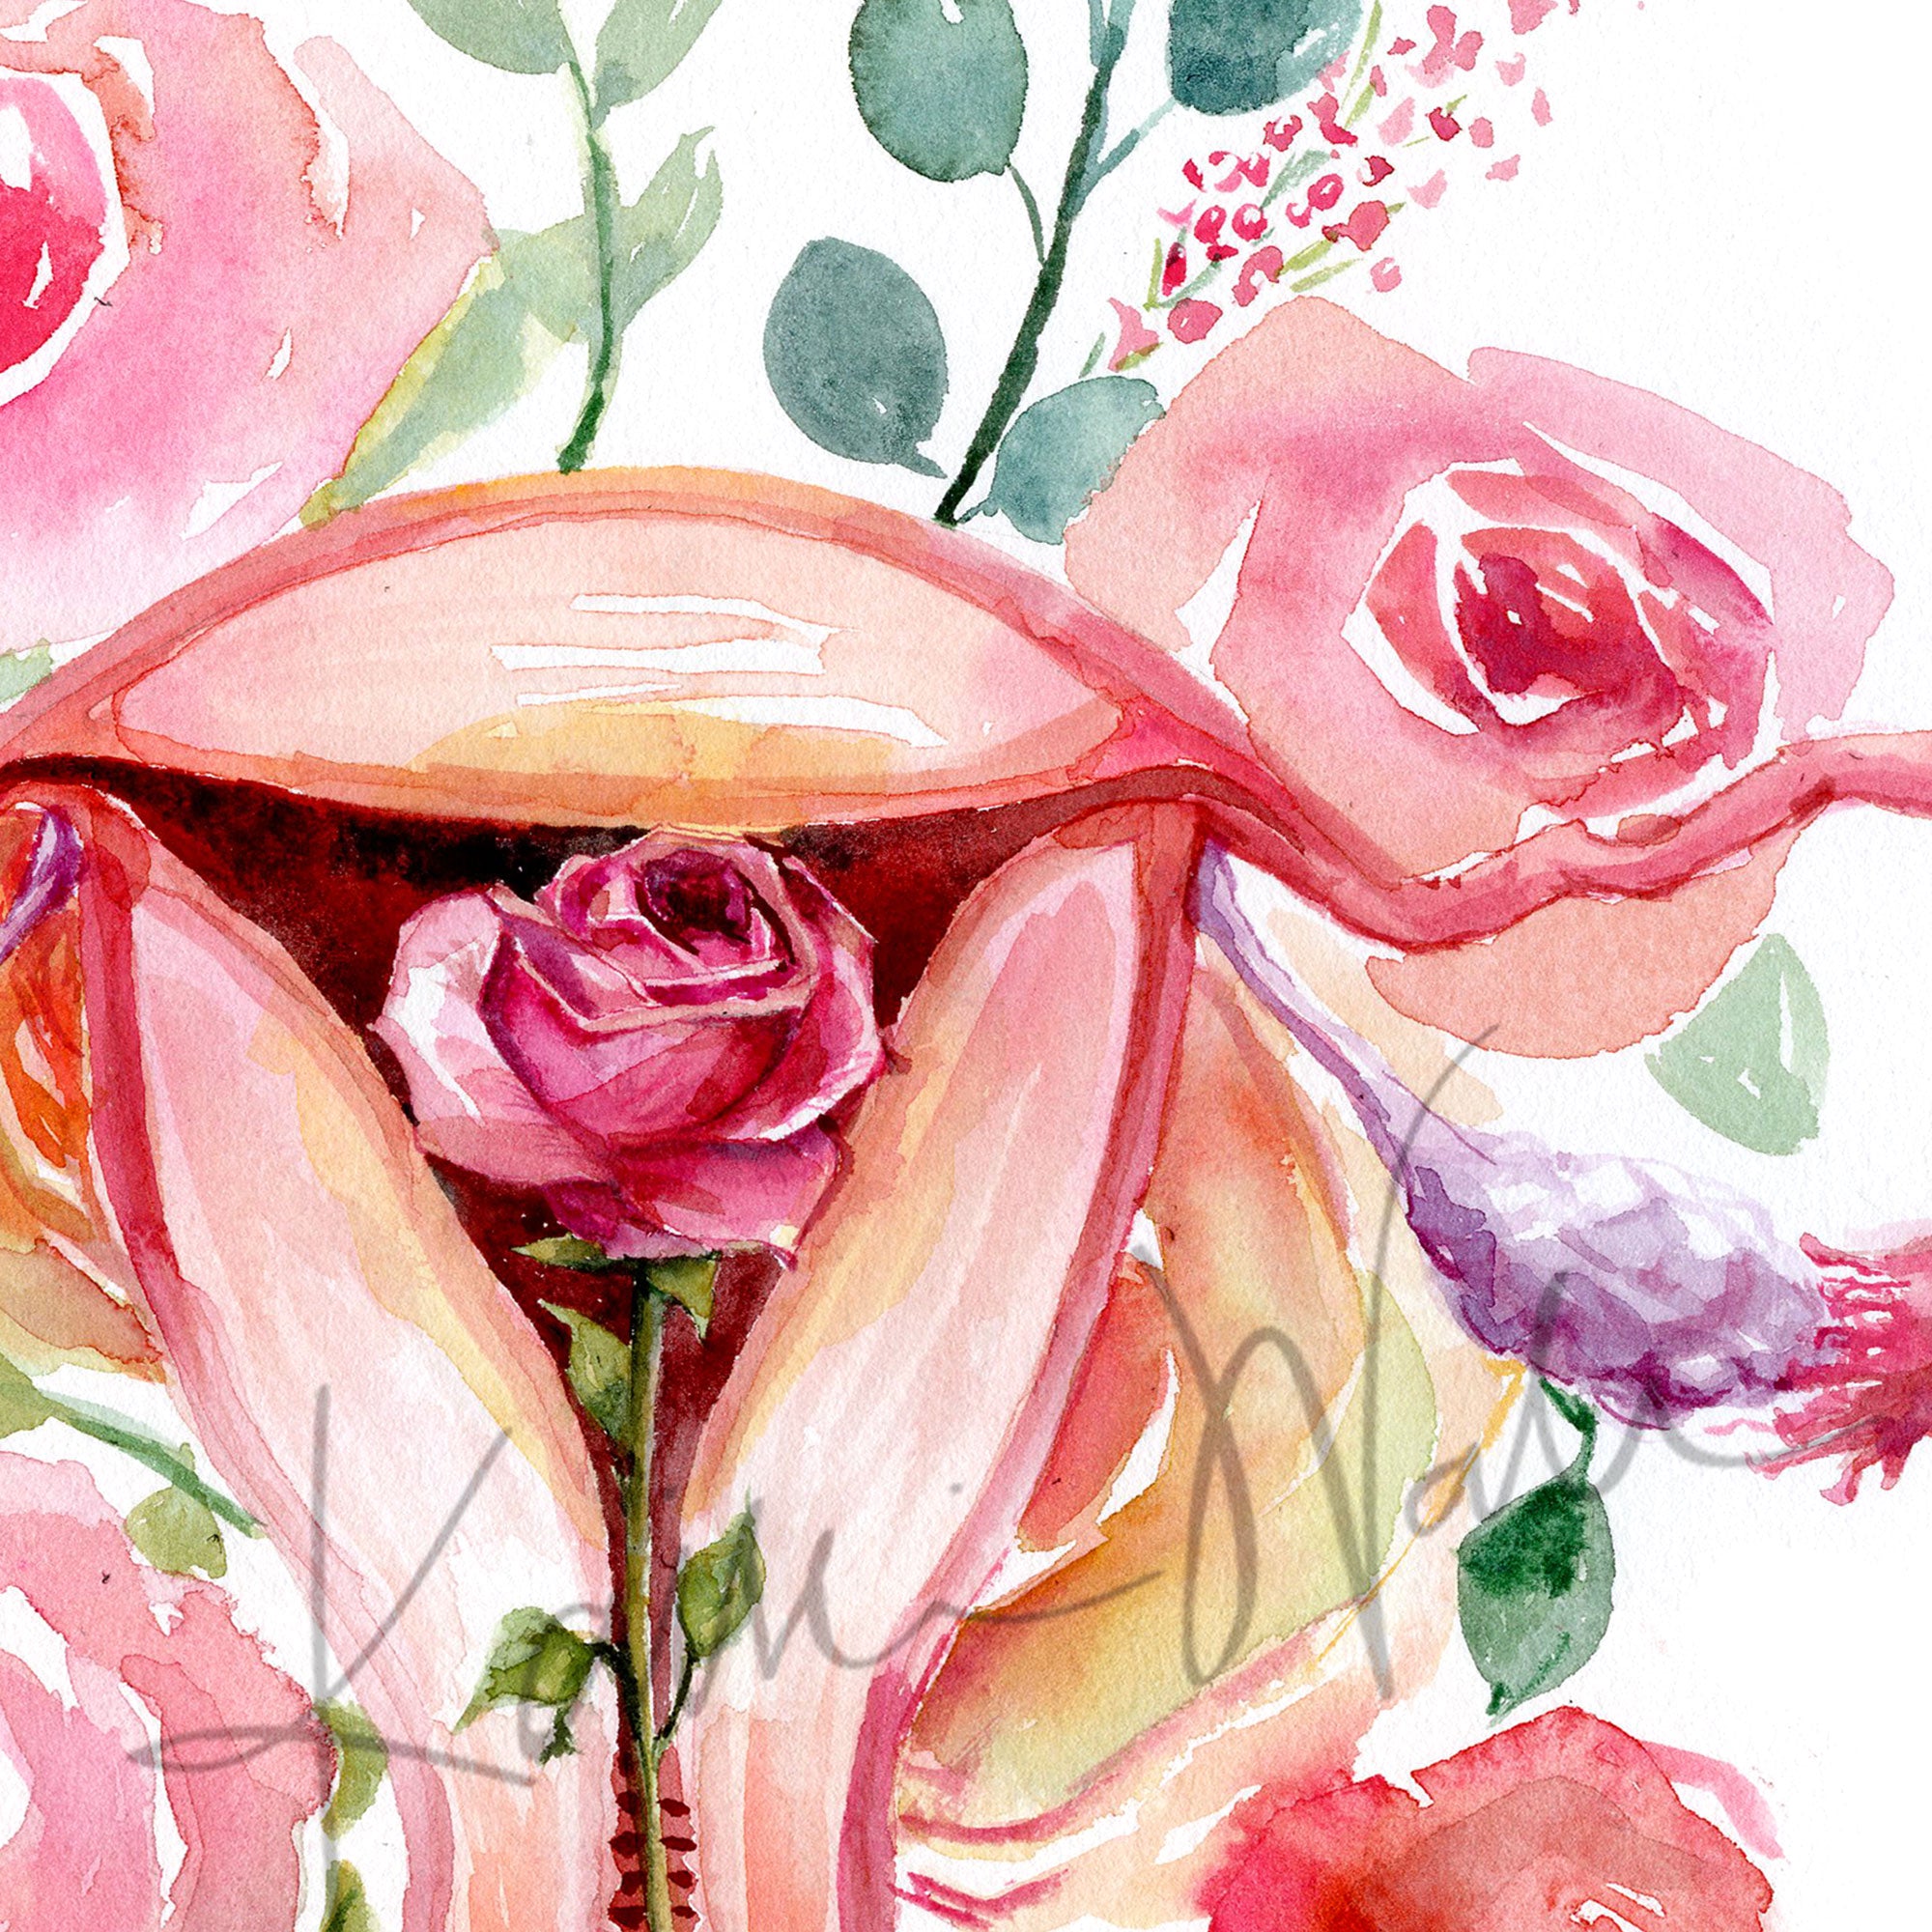 Zoomed in view of a watercolor painting of a uterus with flowers around.